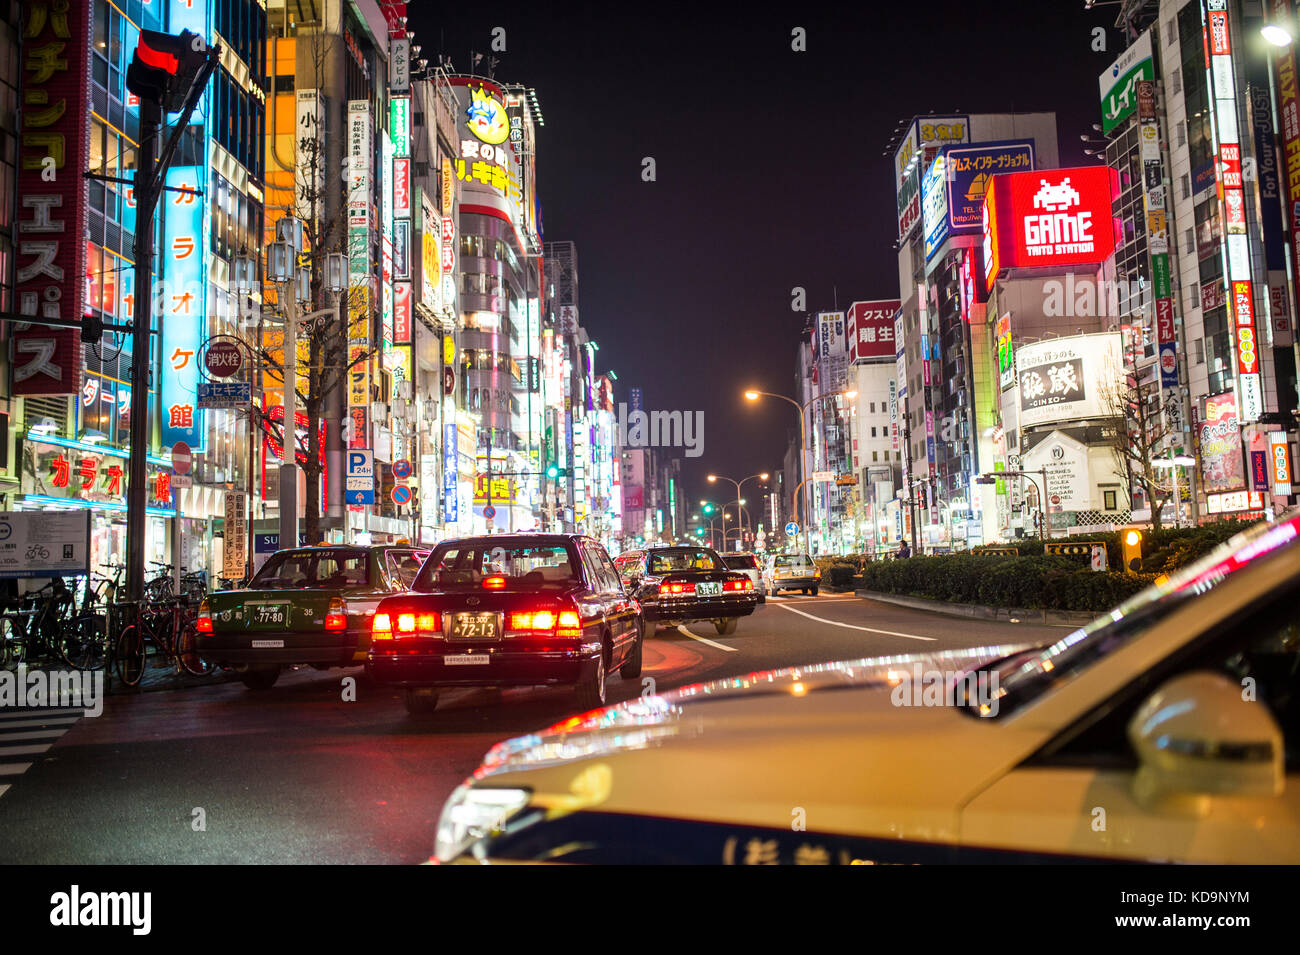 TOKYO - DECEMBER 31, 2016: Some taxi are passing in one of Japan's busiest crossroads in Shinjuko district at night. Shinjuku is a special ward in Tok Stock Photo